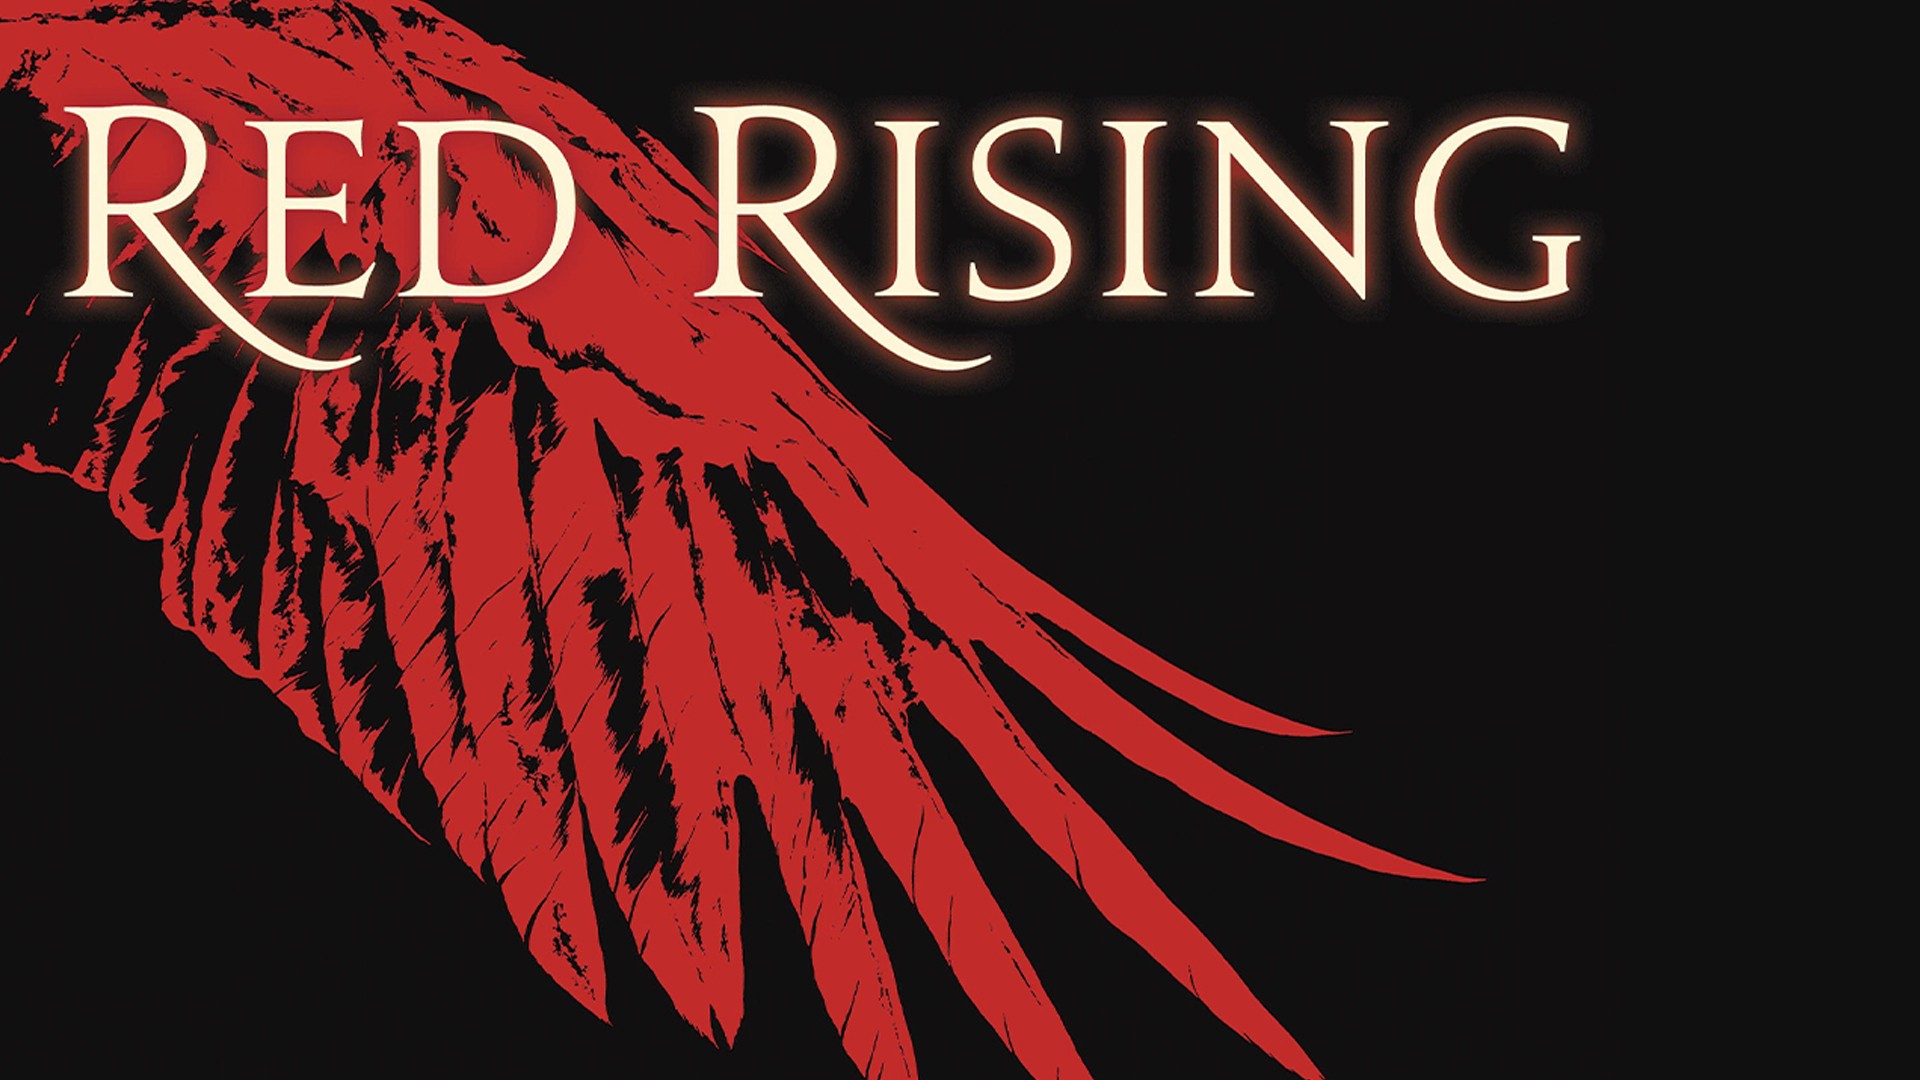 General 1920x1080 Red Rising simple background wings black background